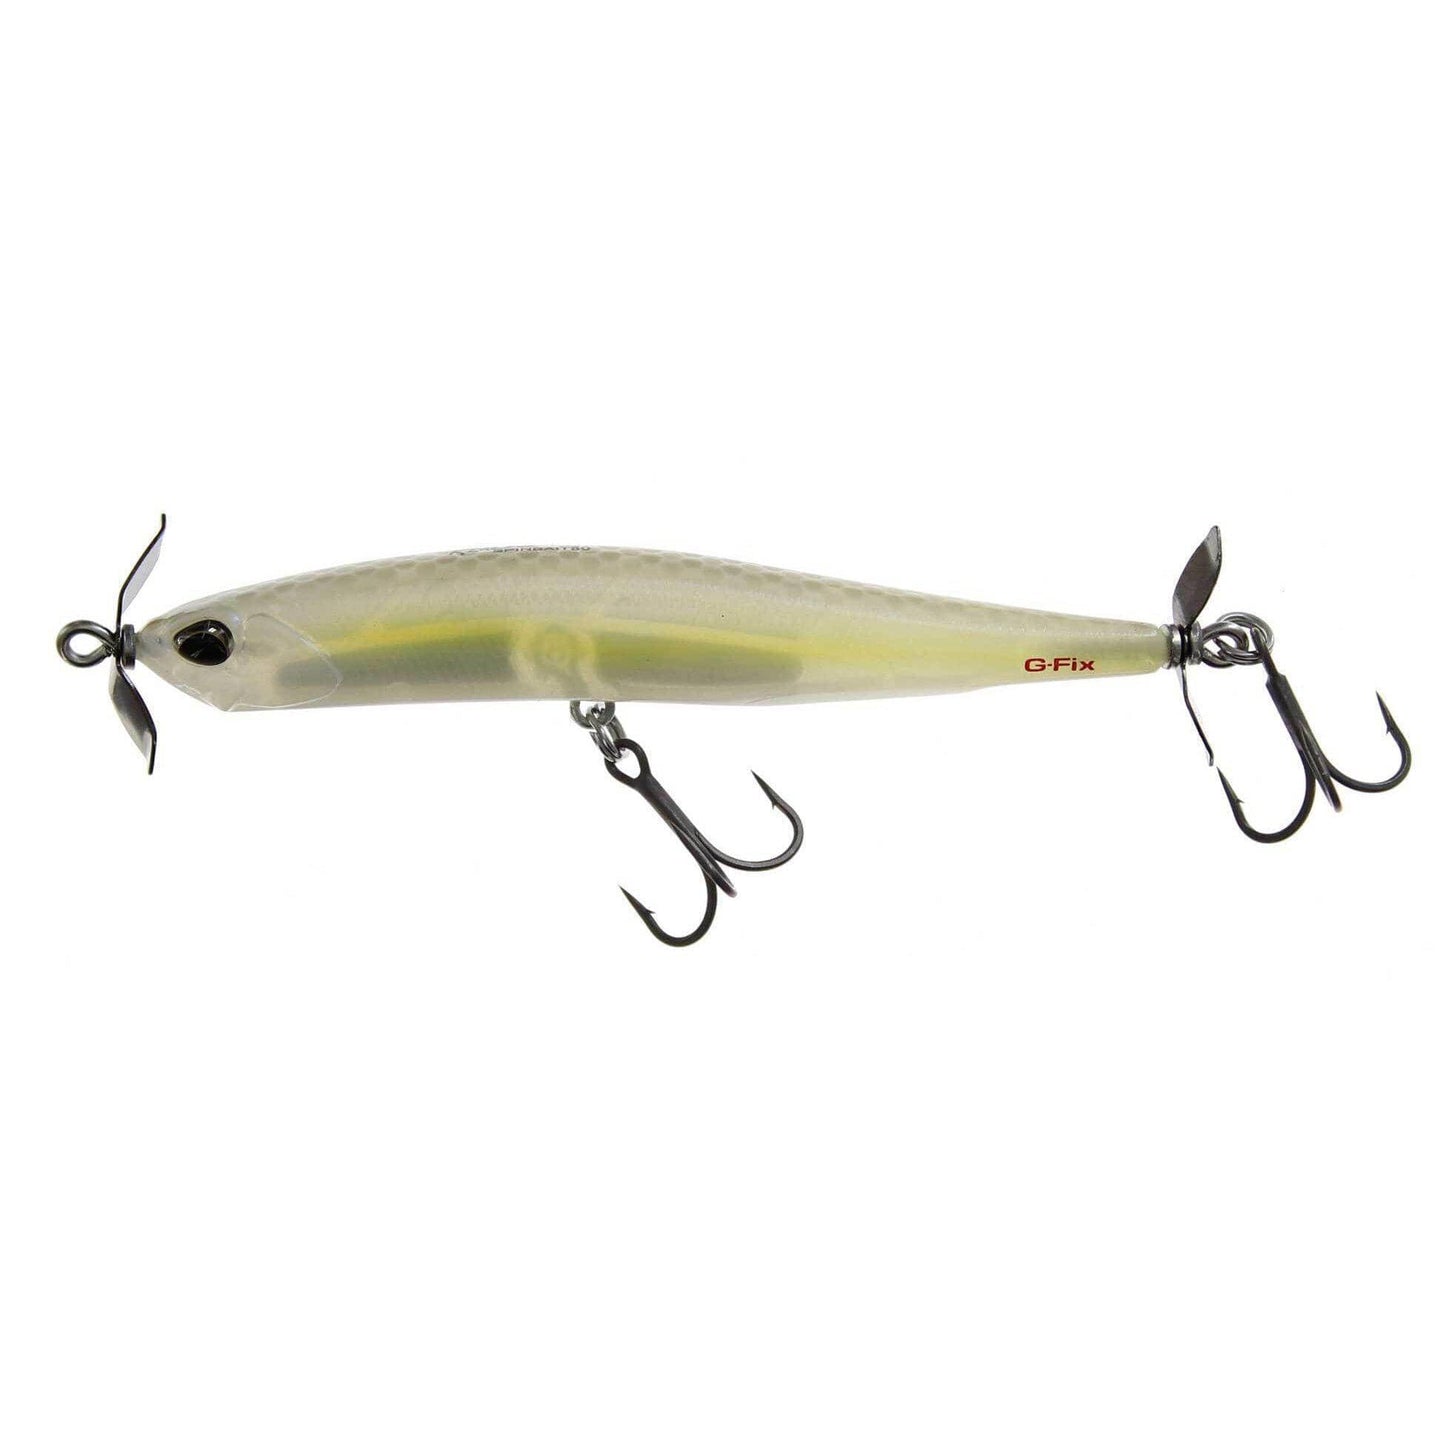 Duo Spinbait Spybait 80 G-Fix Chartreuse Shad